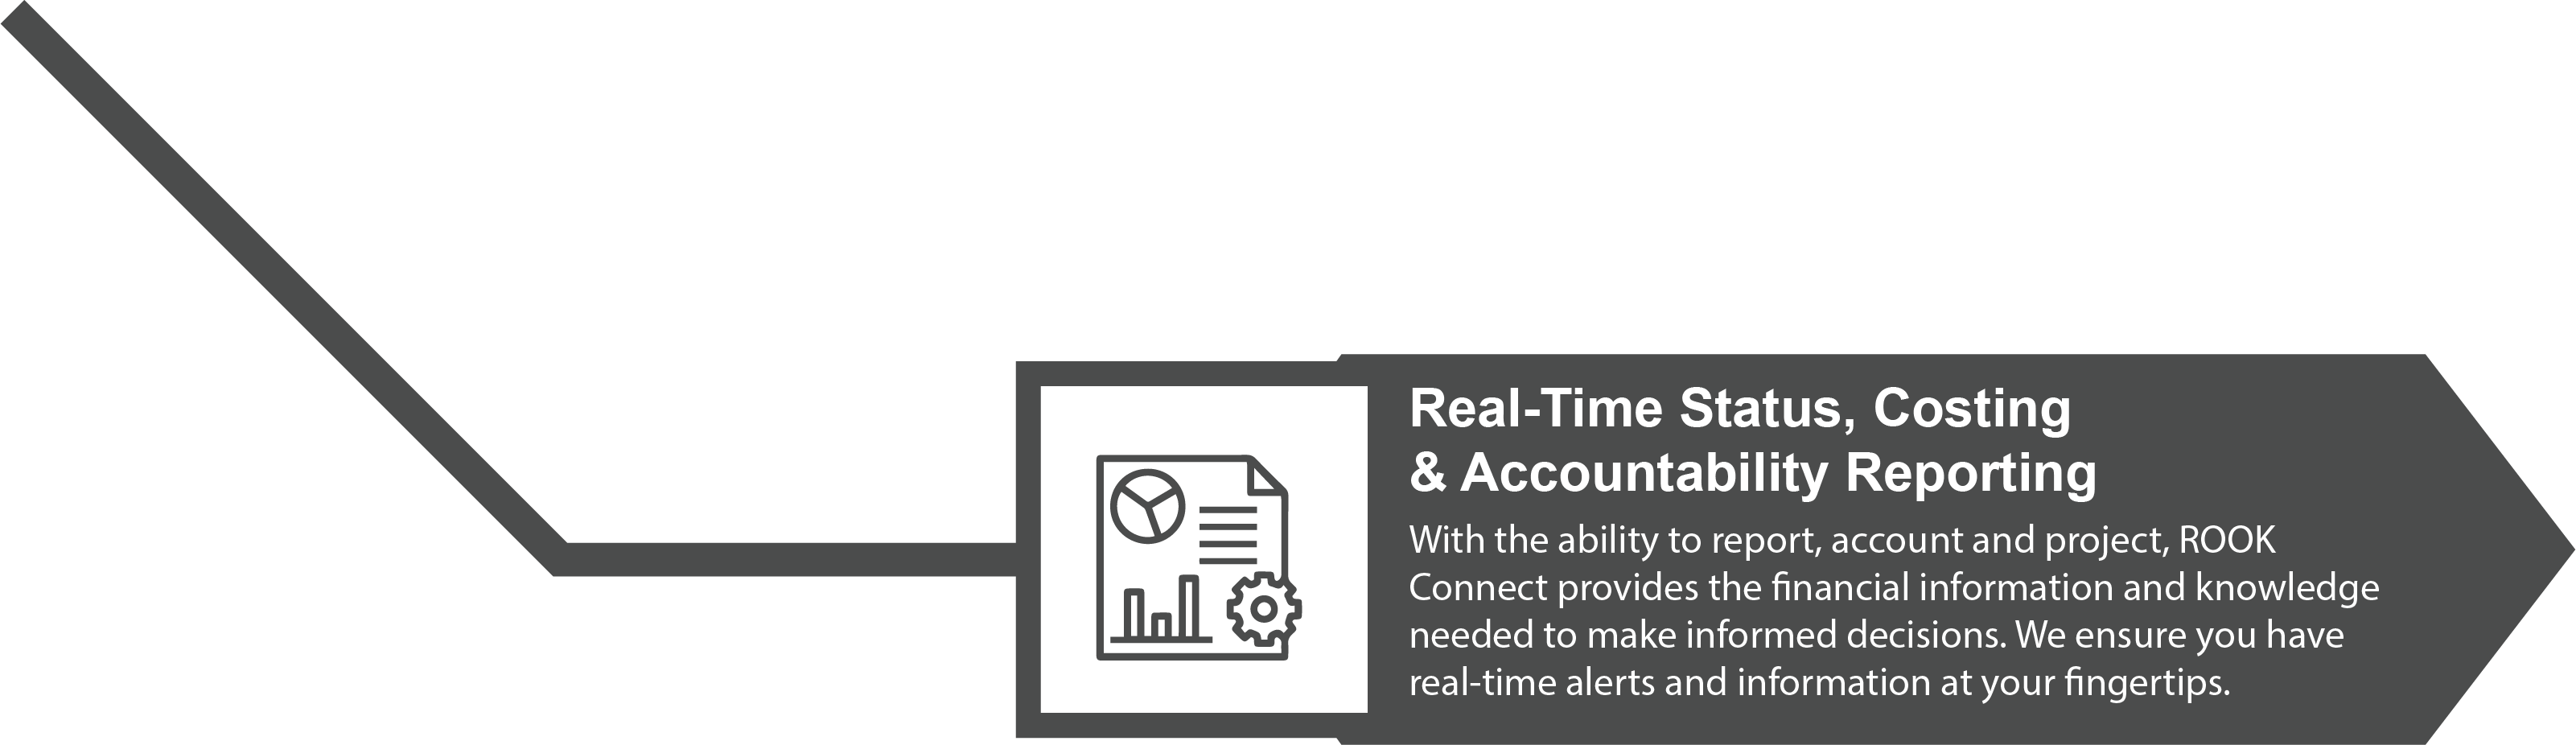 Real-Time Status, Costing & Accountability Reporting